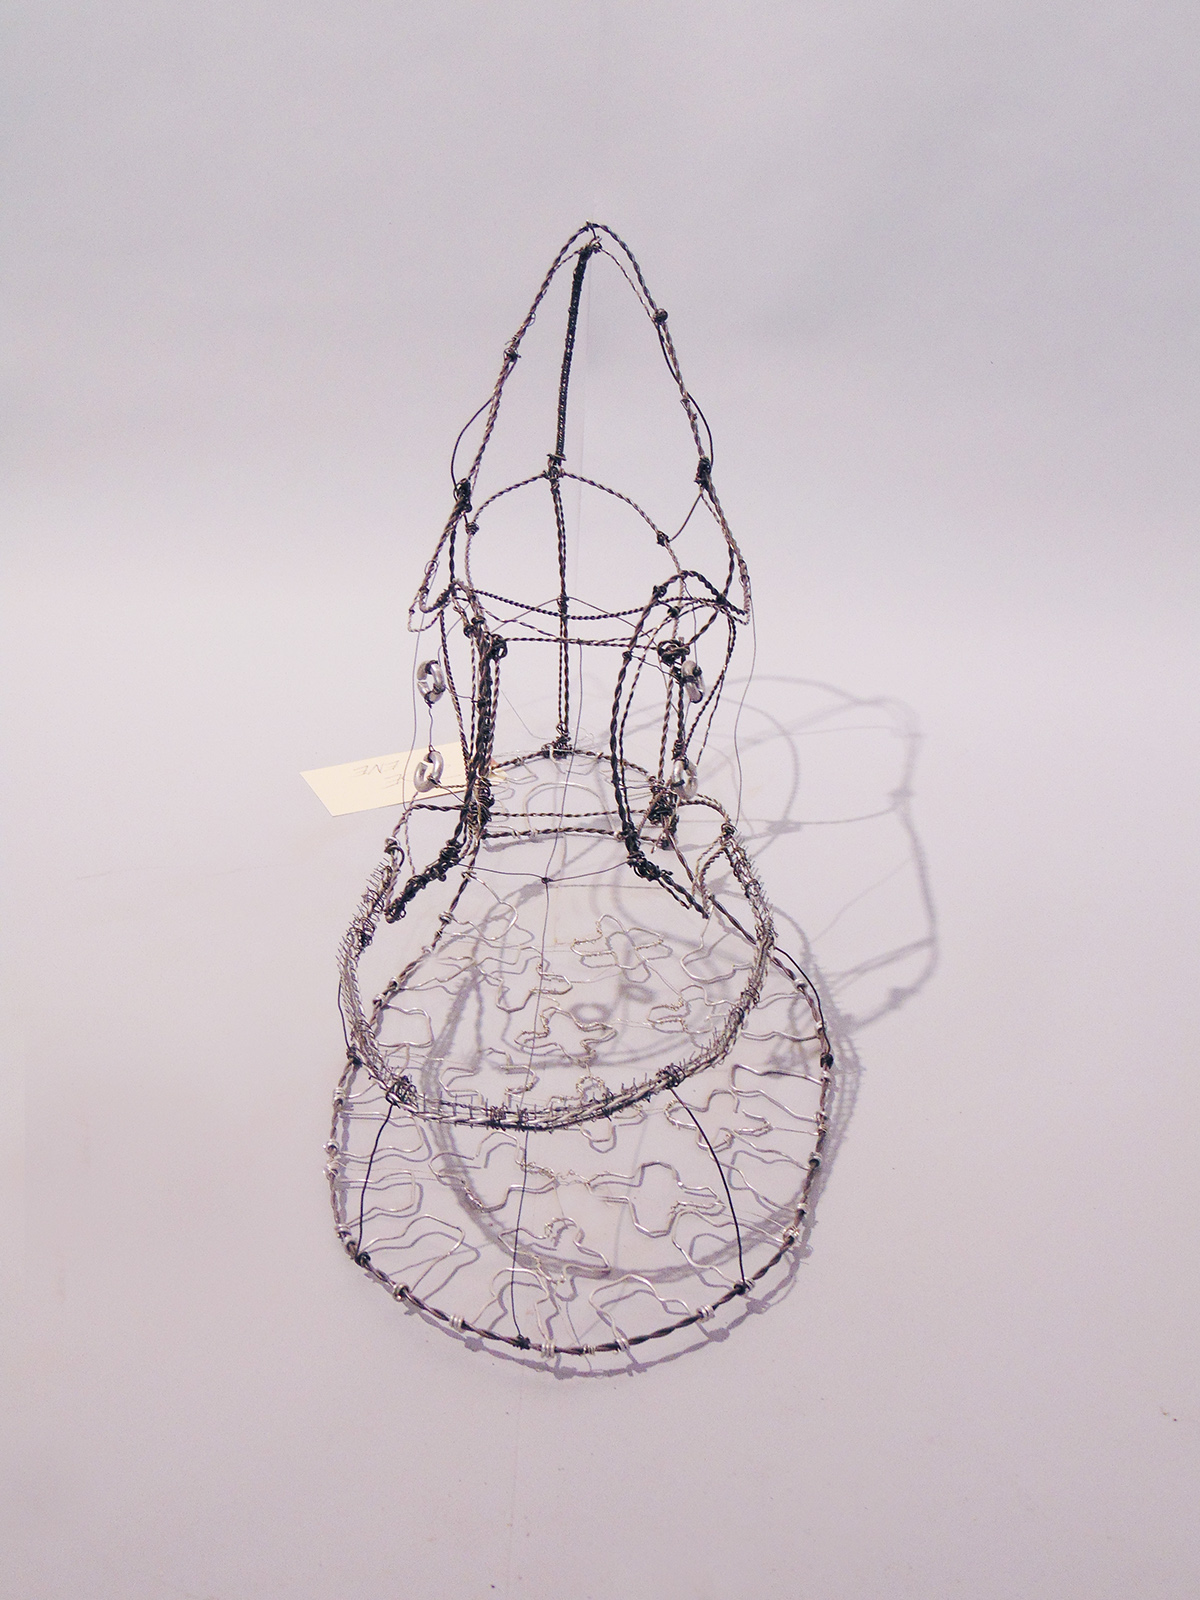 mickey ackerman spatial spring foundation chair project wire shoe 